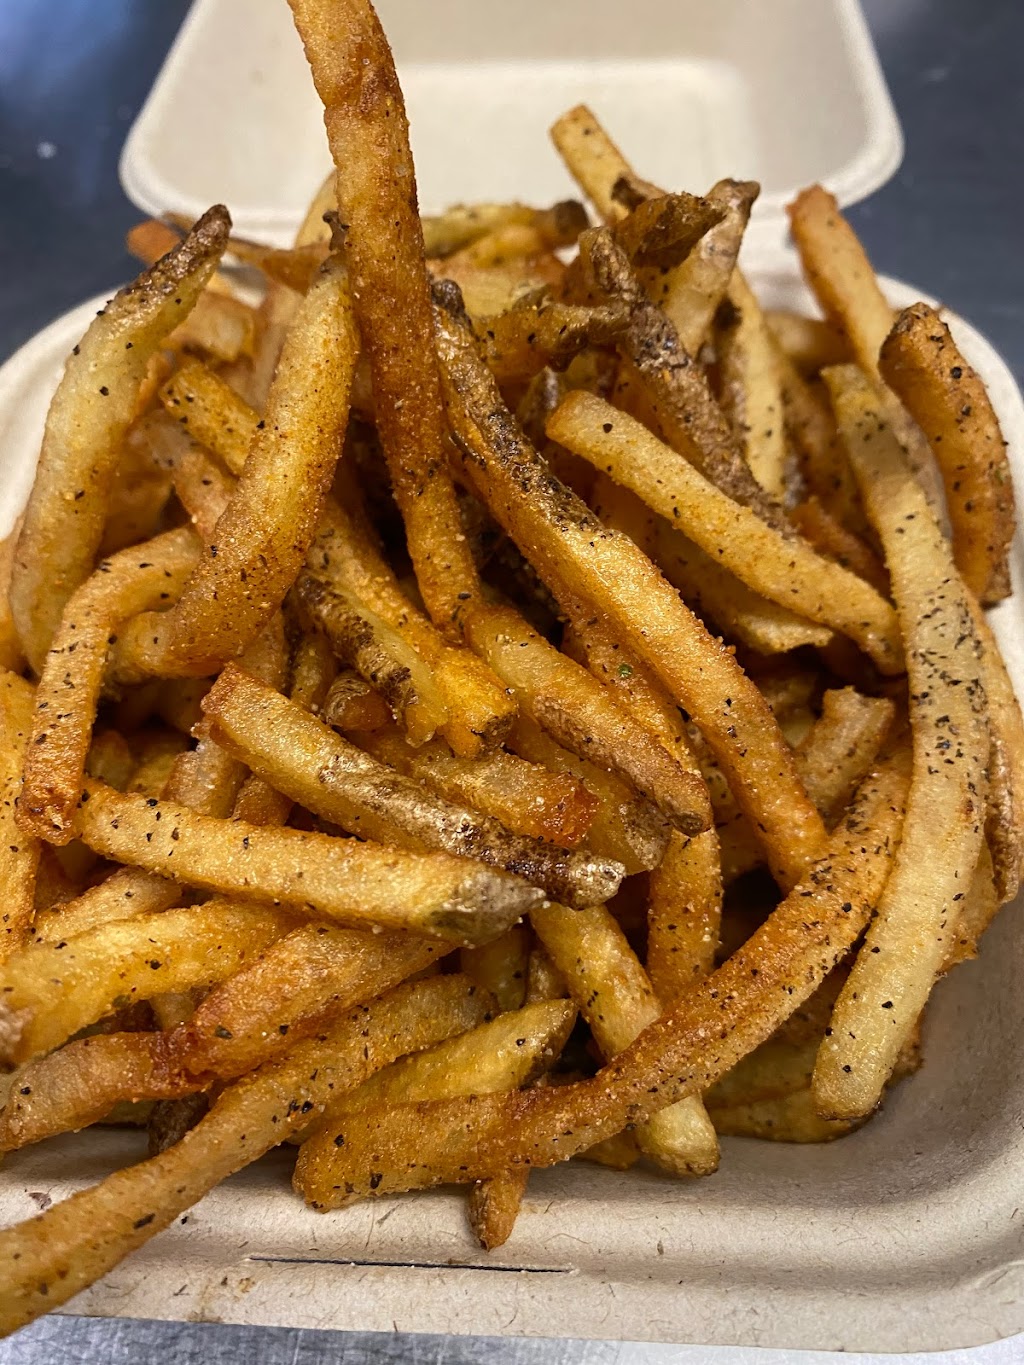 Spuds Your Way | 3500 Whitney Ave, Hamden, CT 06518 | Phone: (203) 239-3000